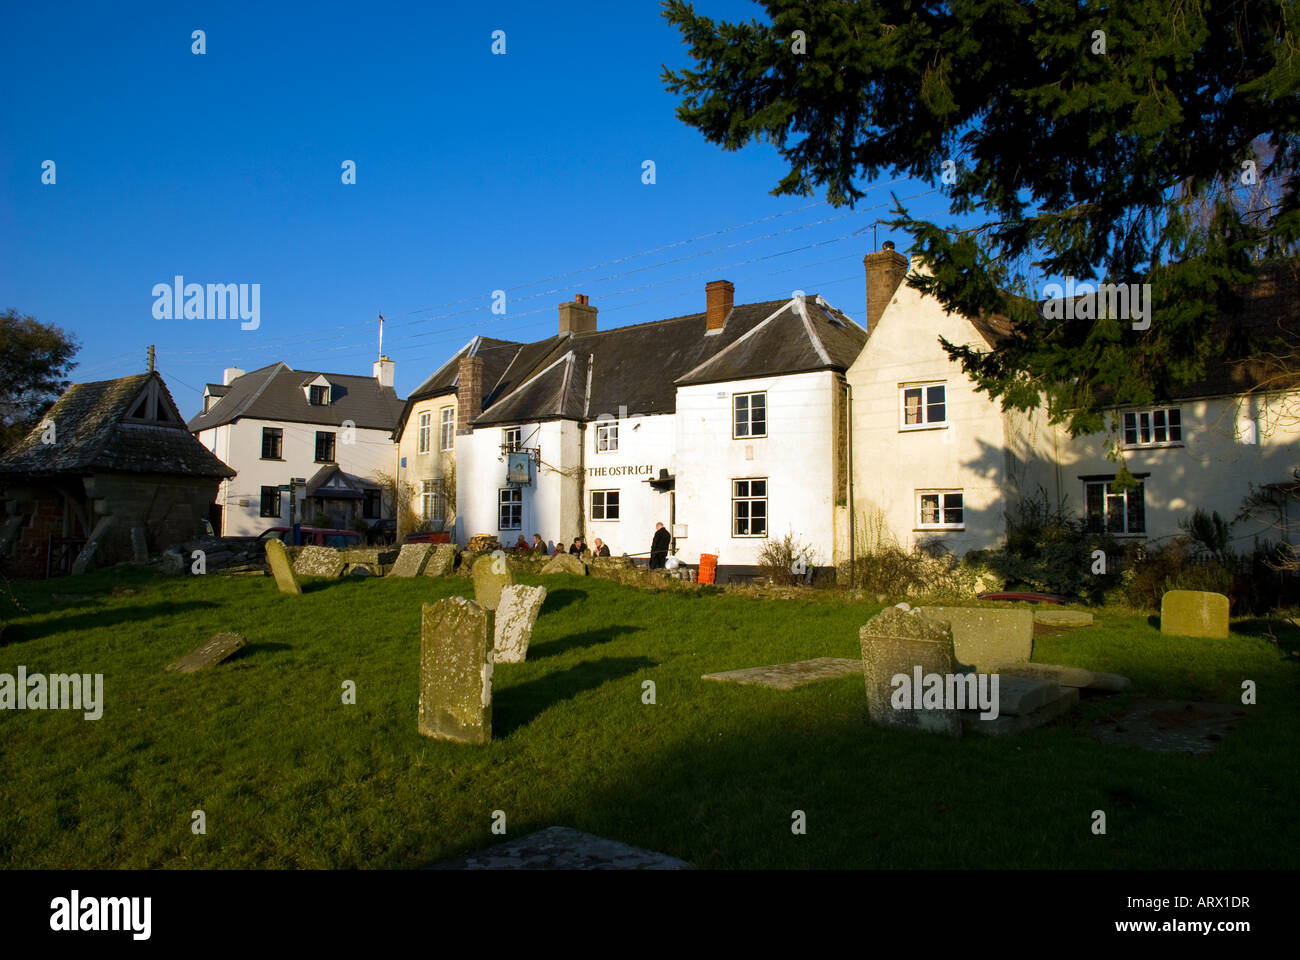 Newland Forest of Dean Gloucestershire UK The Ostrich Inn a pub famous for real ale and food Stock Photo